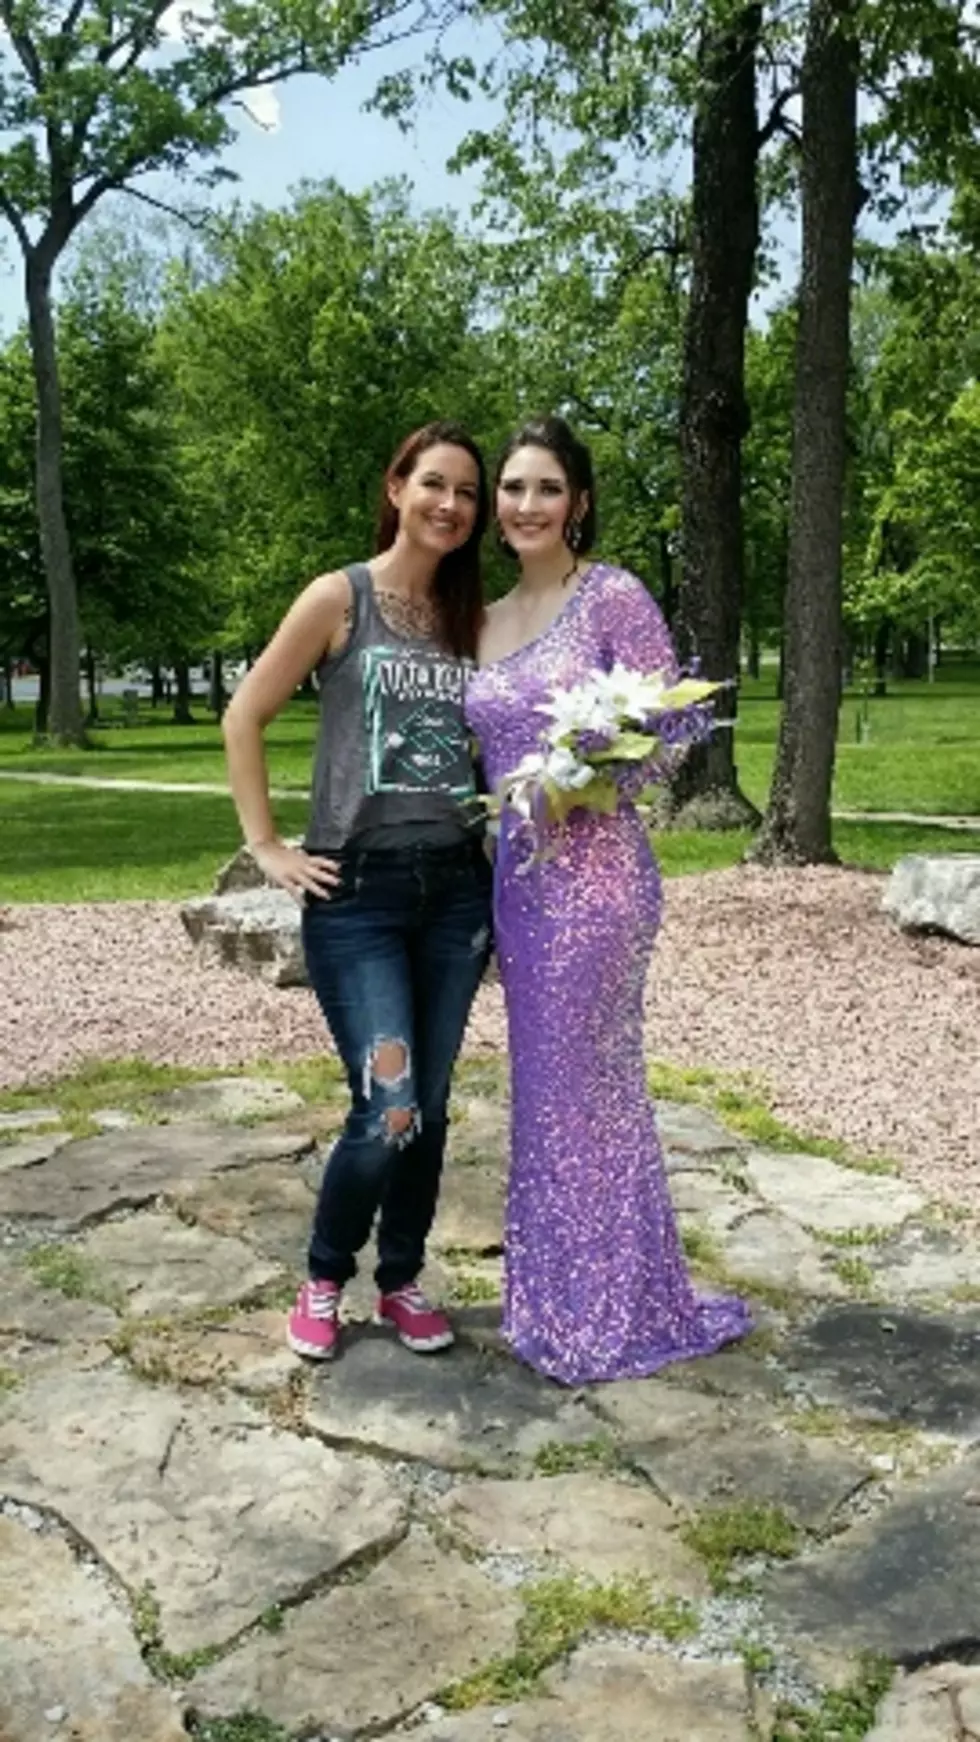 See Photos of Kat’s Daughter Before Her Junior Prom